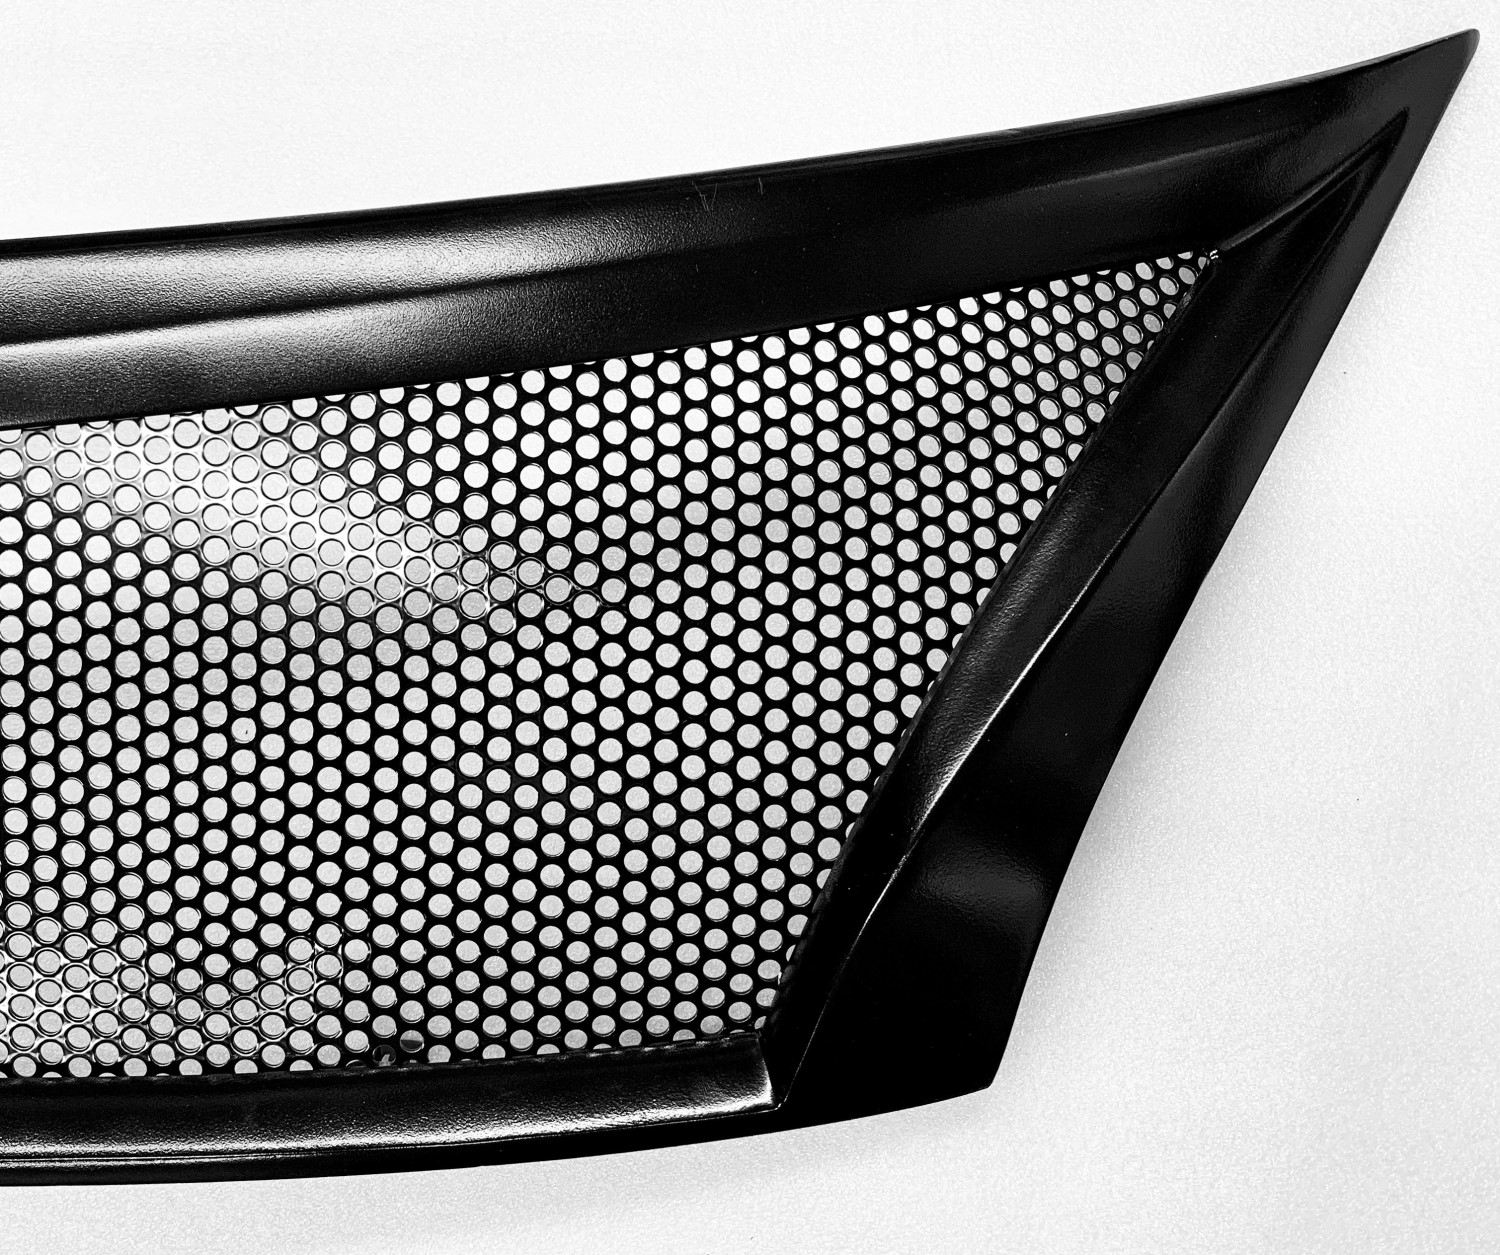 Nissan Altima's New All Black Custom Grille: Simple Yet Striking